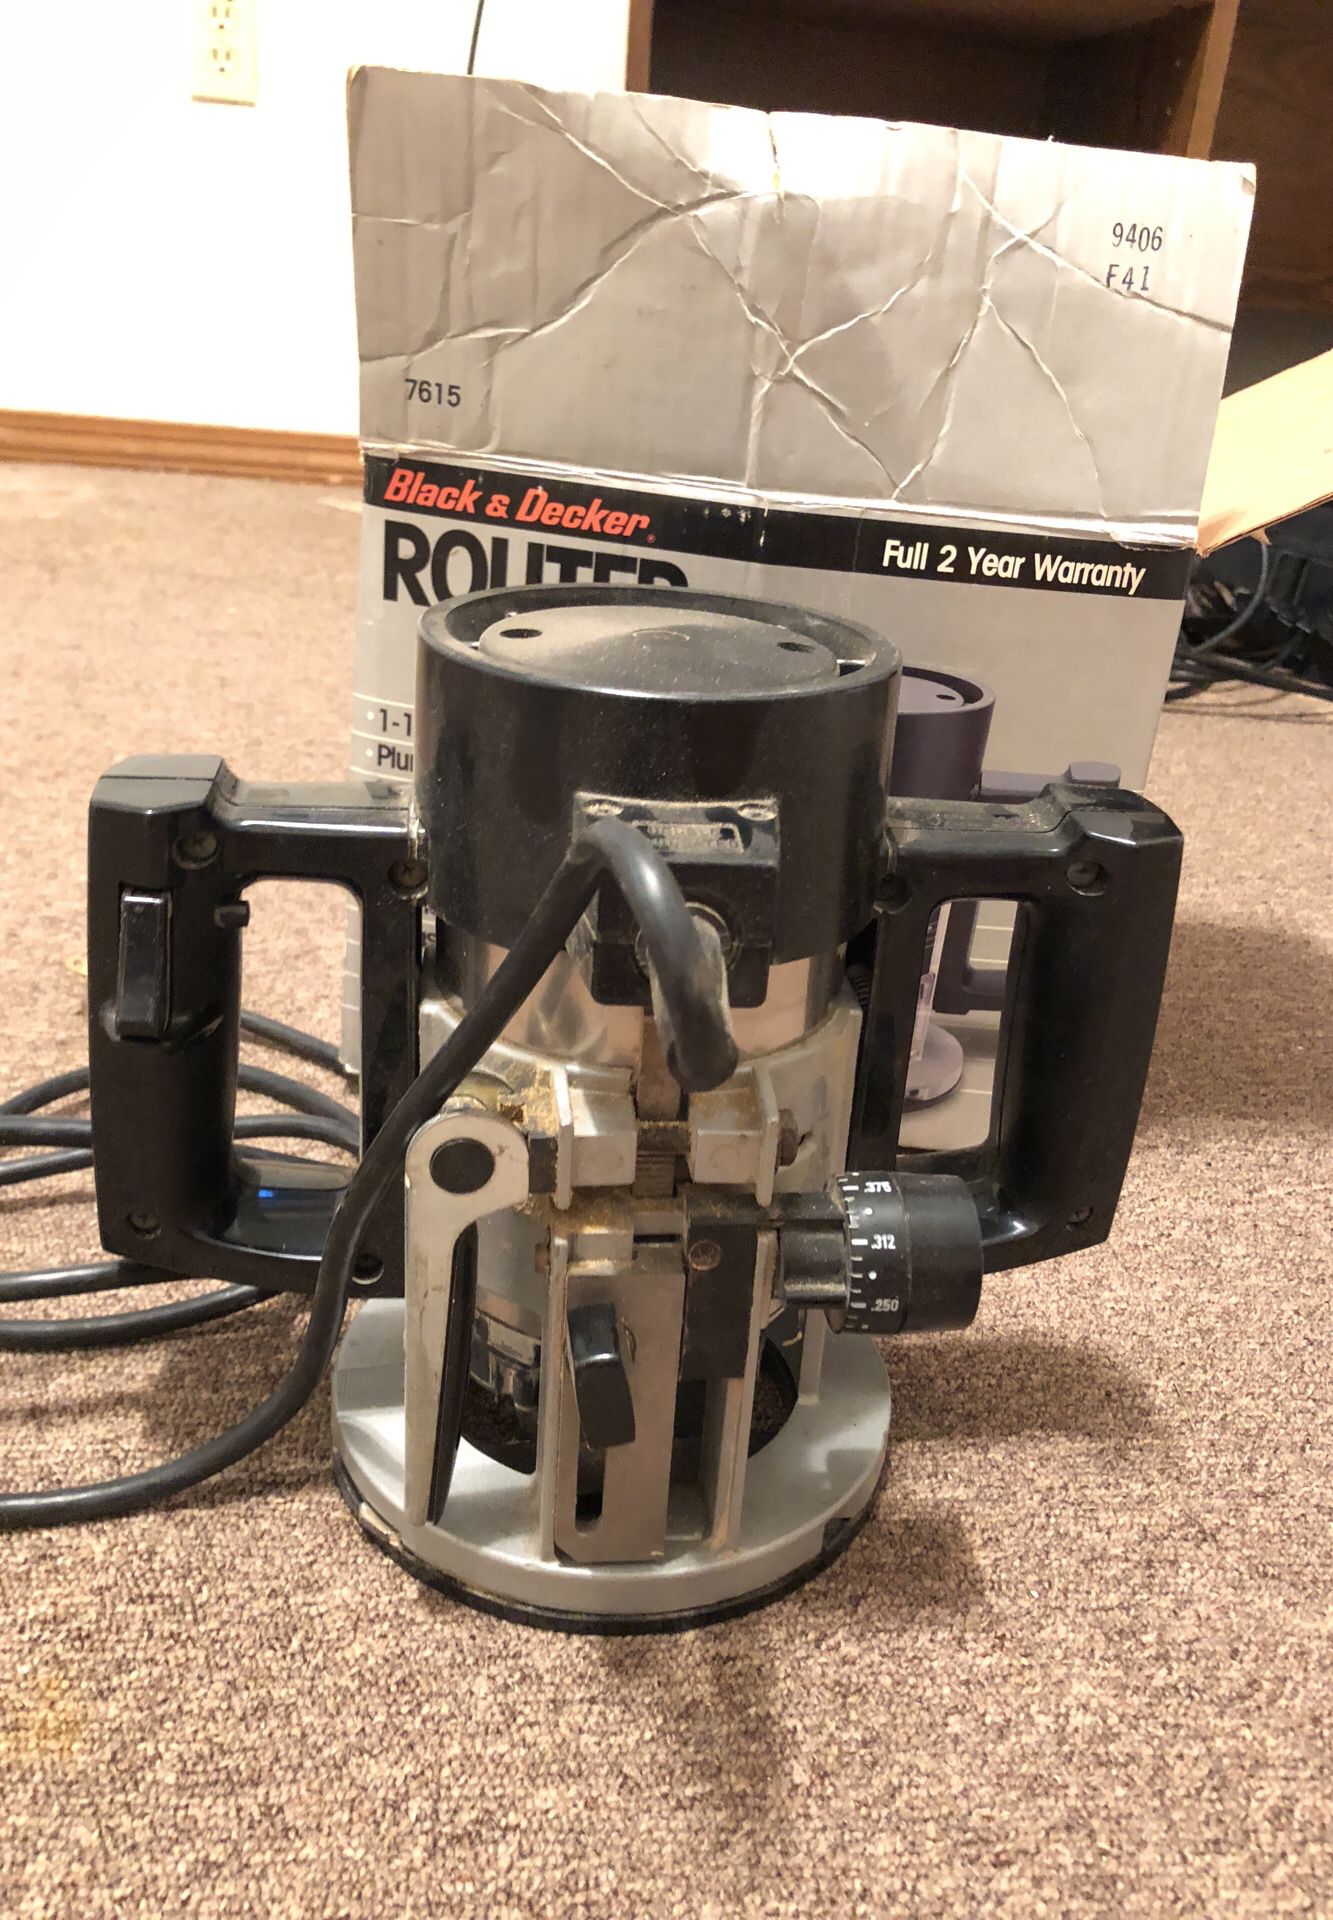 Black & Decker Router 7612, 1 1/2 HP, Type 1 w/ Box & Router Guide 76-234  for Sale in York, PA - OfferUp